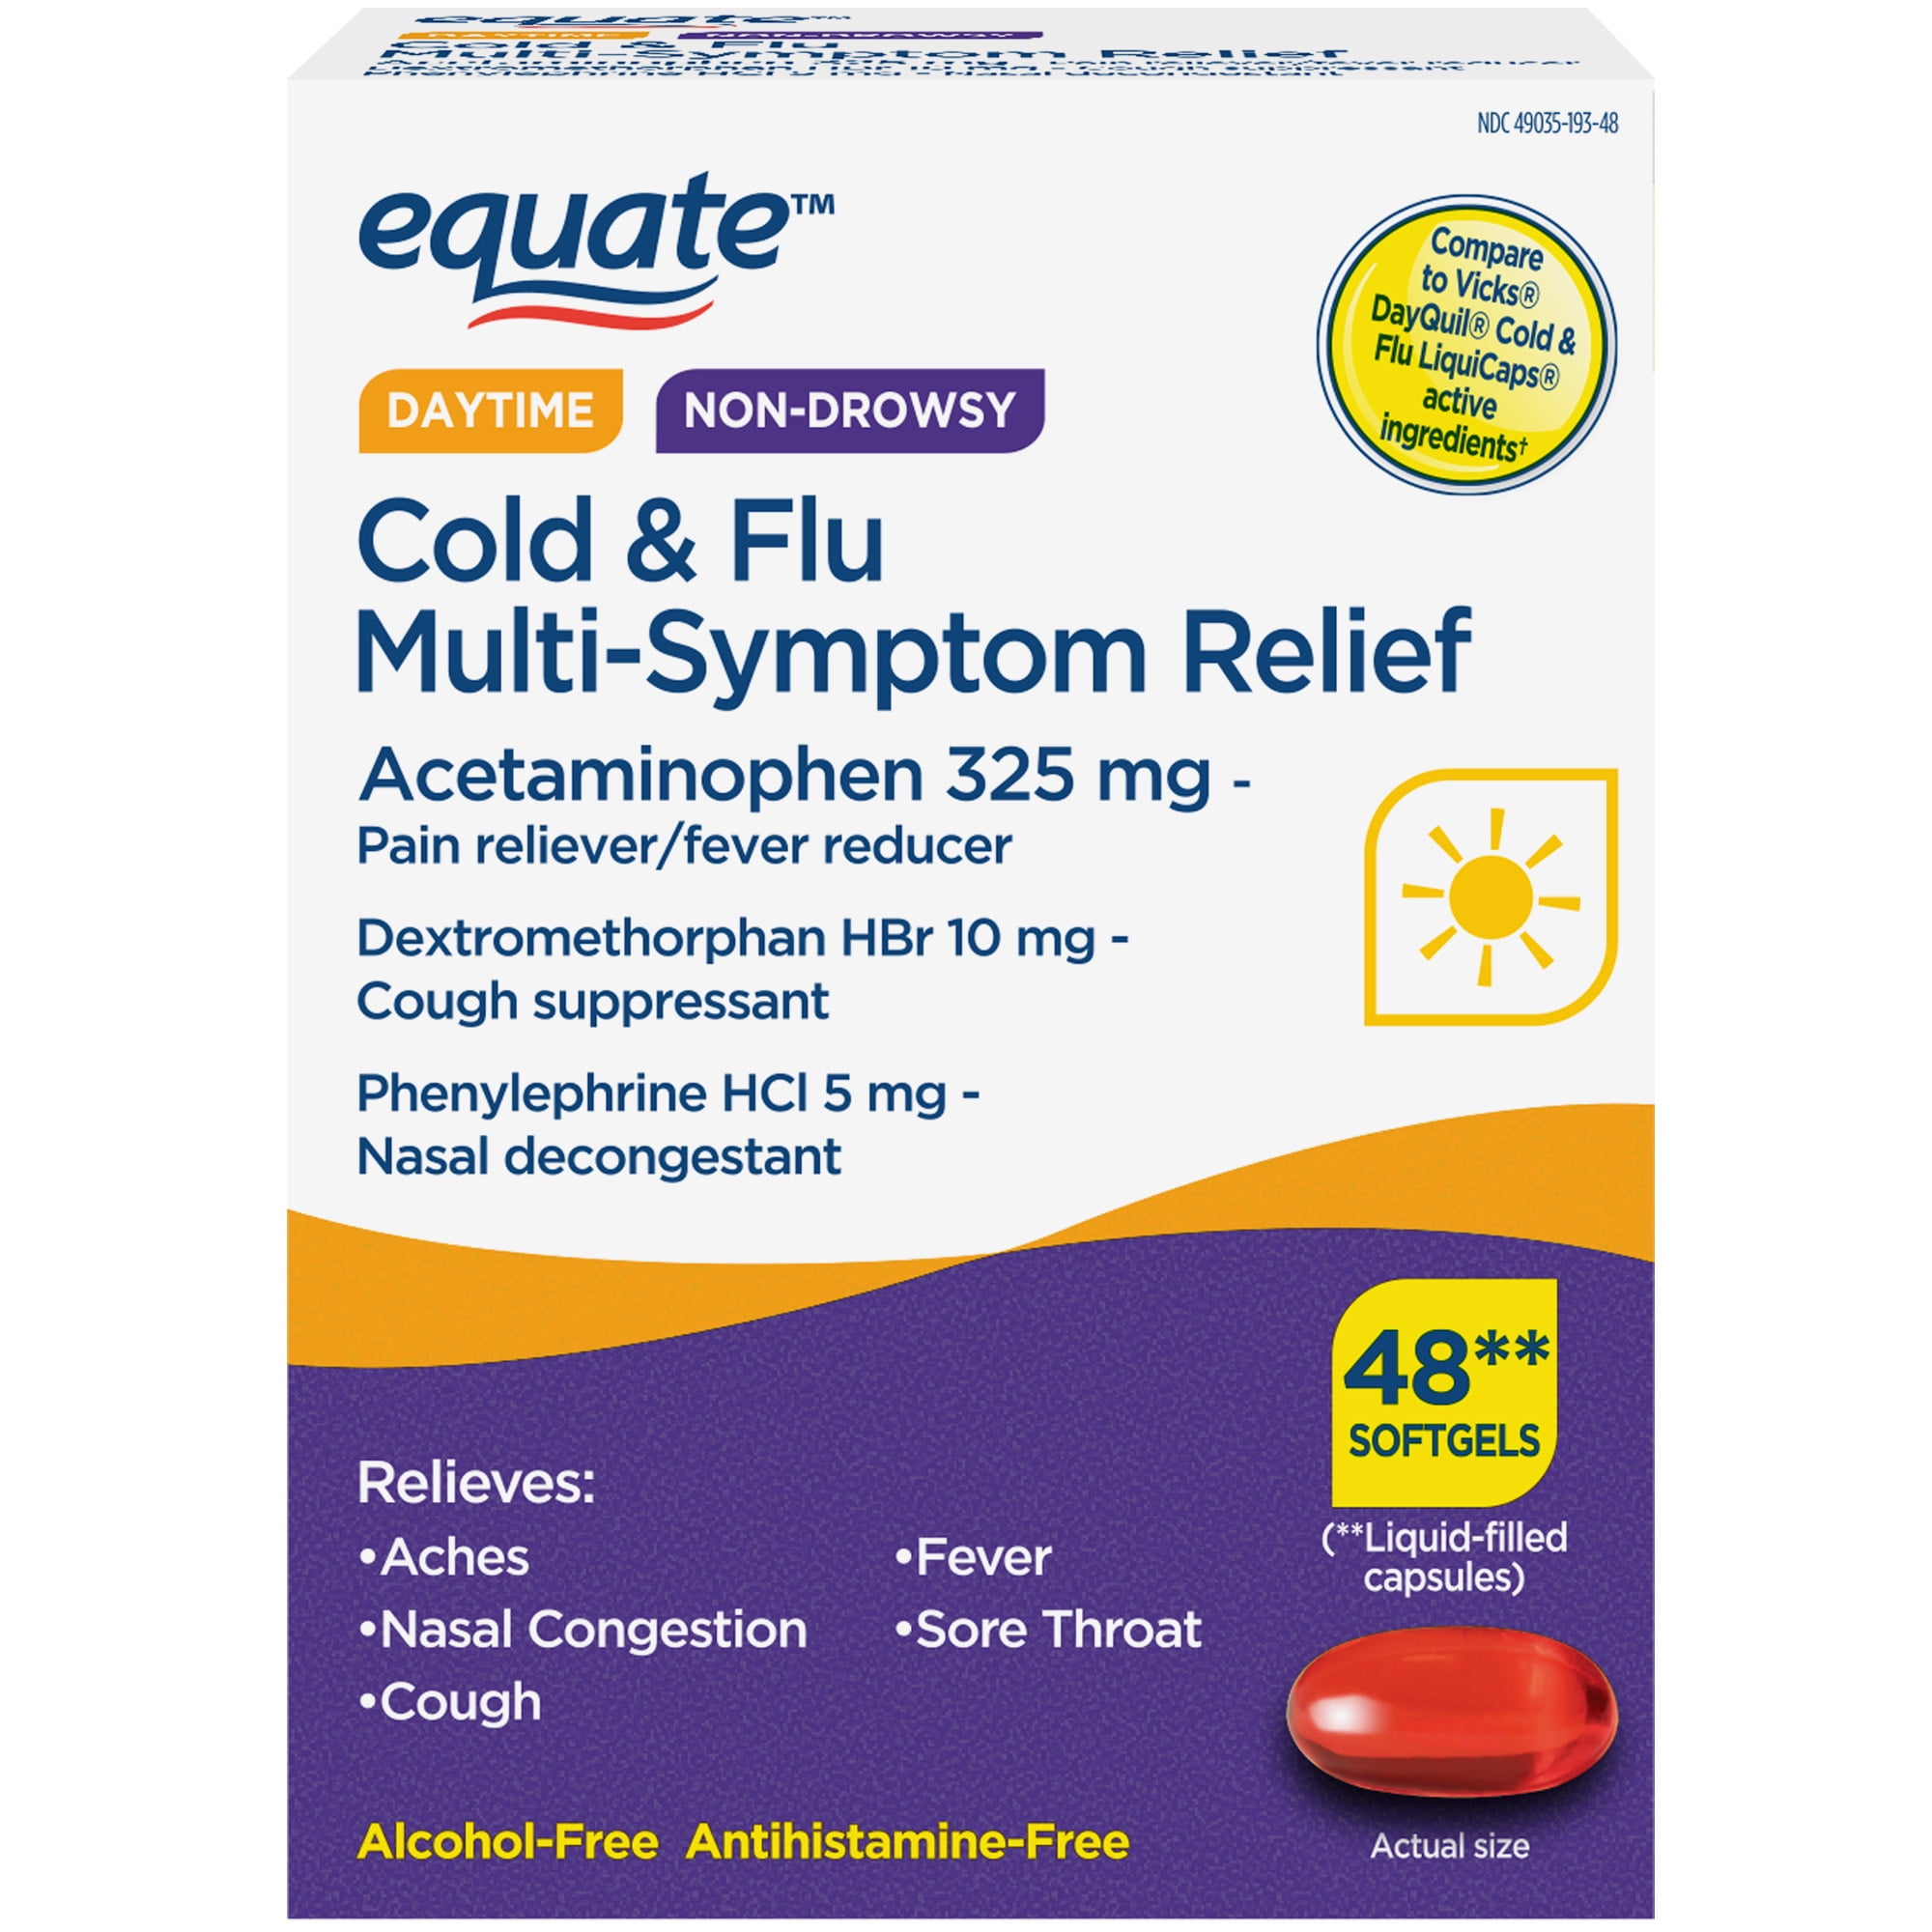 Equate Cold and Flu Multi-Symptom Relief Fever Reducer Throat Remedies Nasal Decongestant Gels, 48 Count